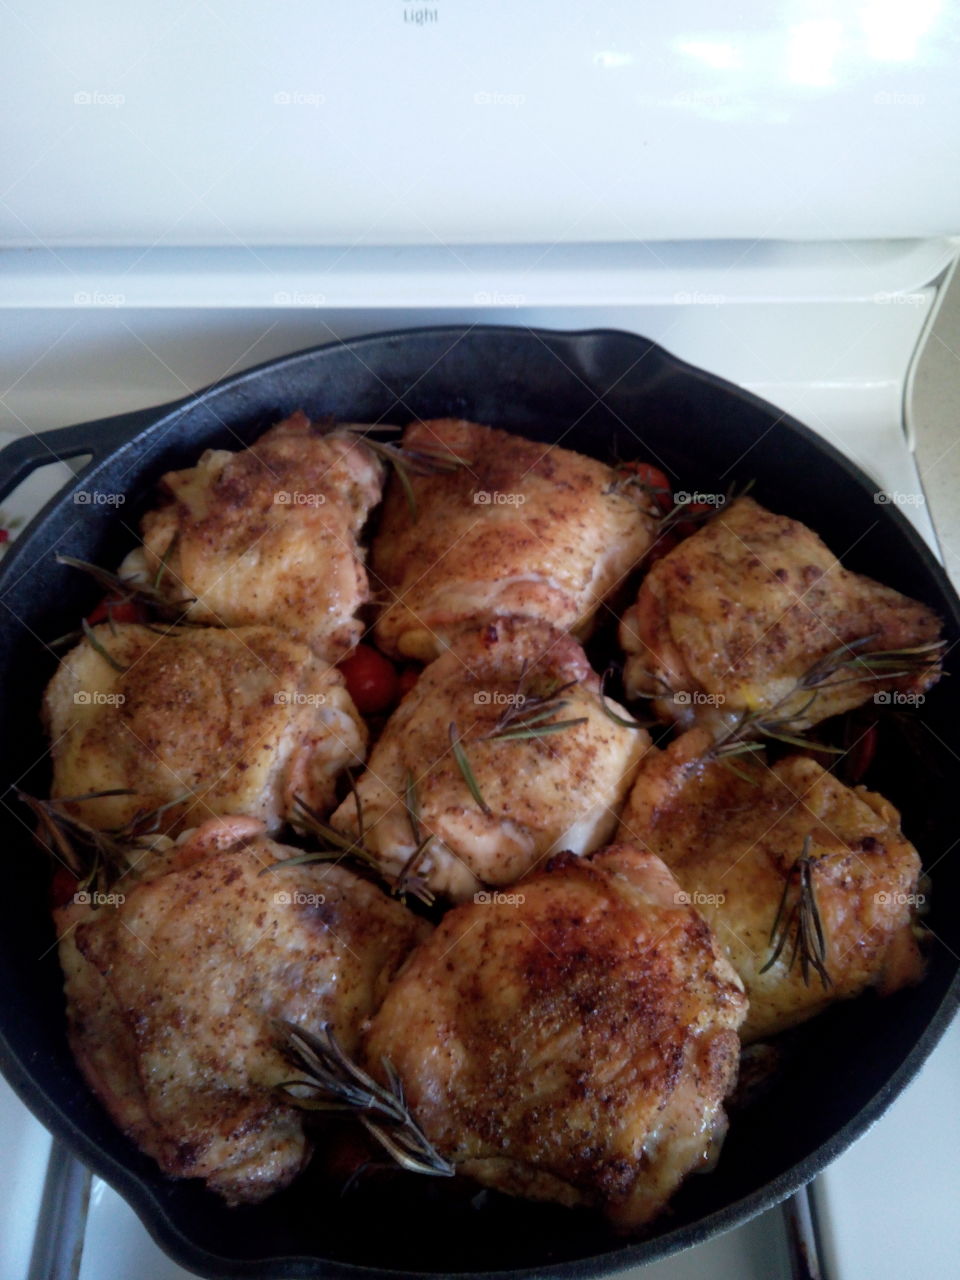 Roasted Rosemary Chicken. Rosemary chicken thighs roasted in a cast iron skillet